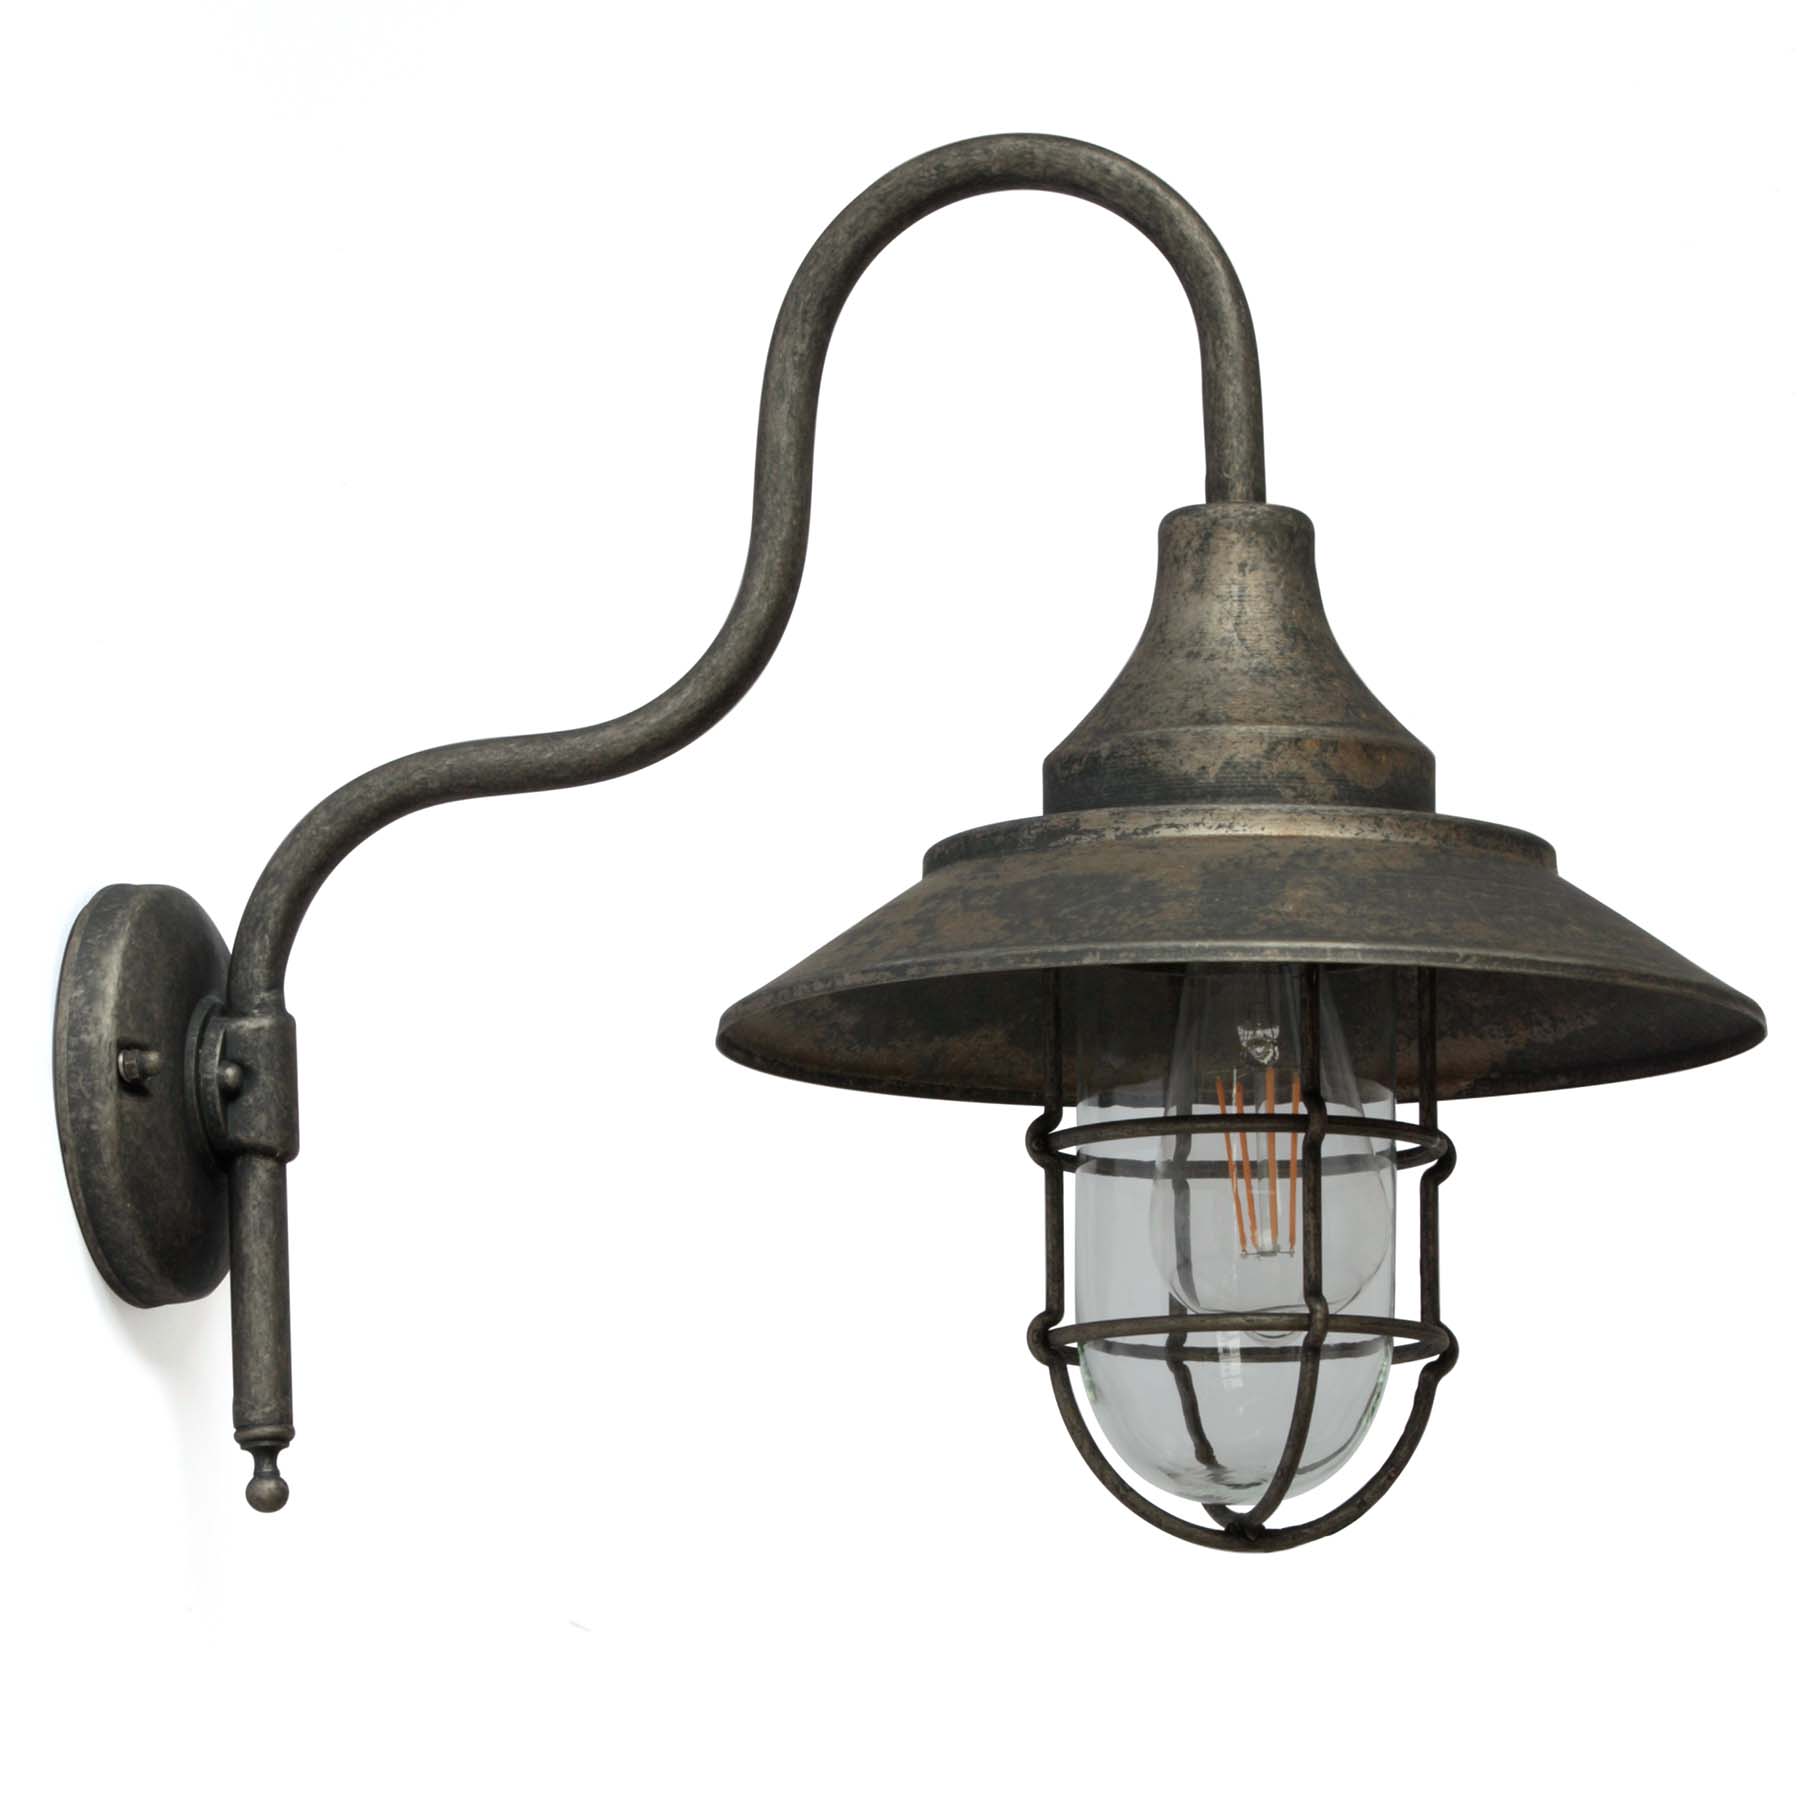 Exclusive brass barn lamp N° 776 with bracket